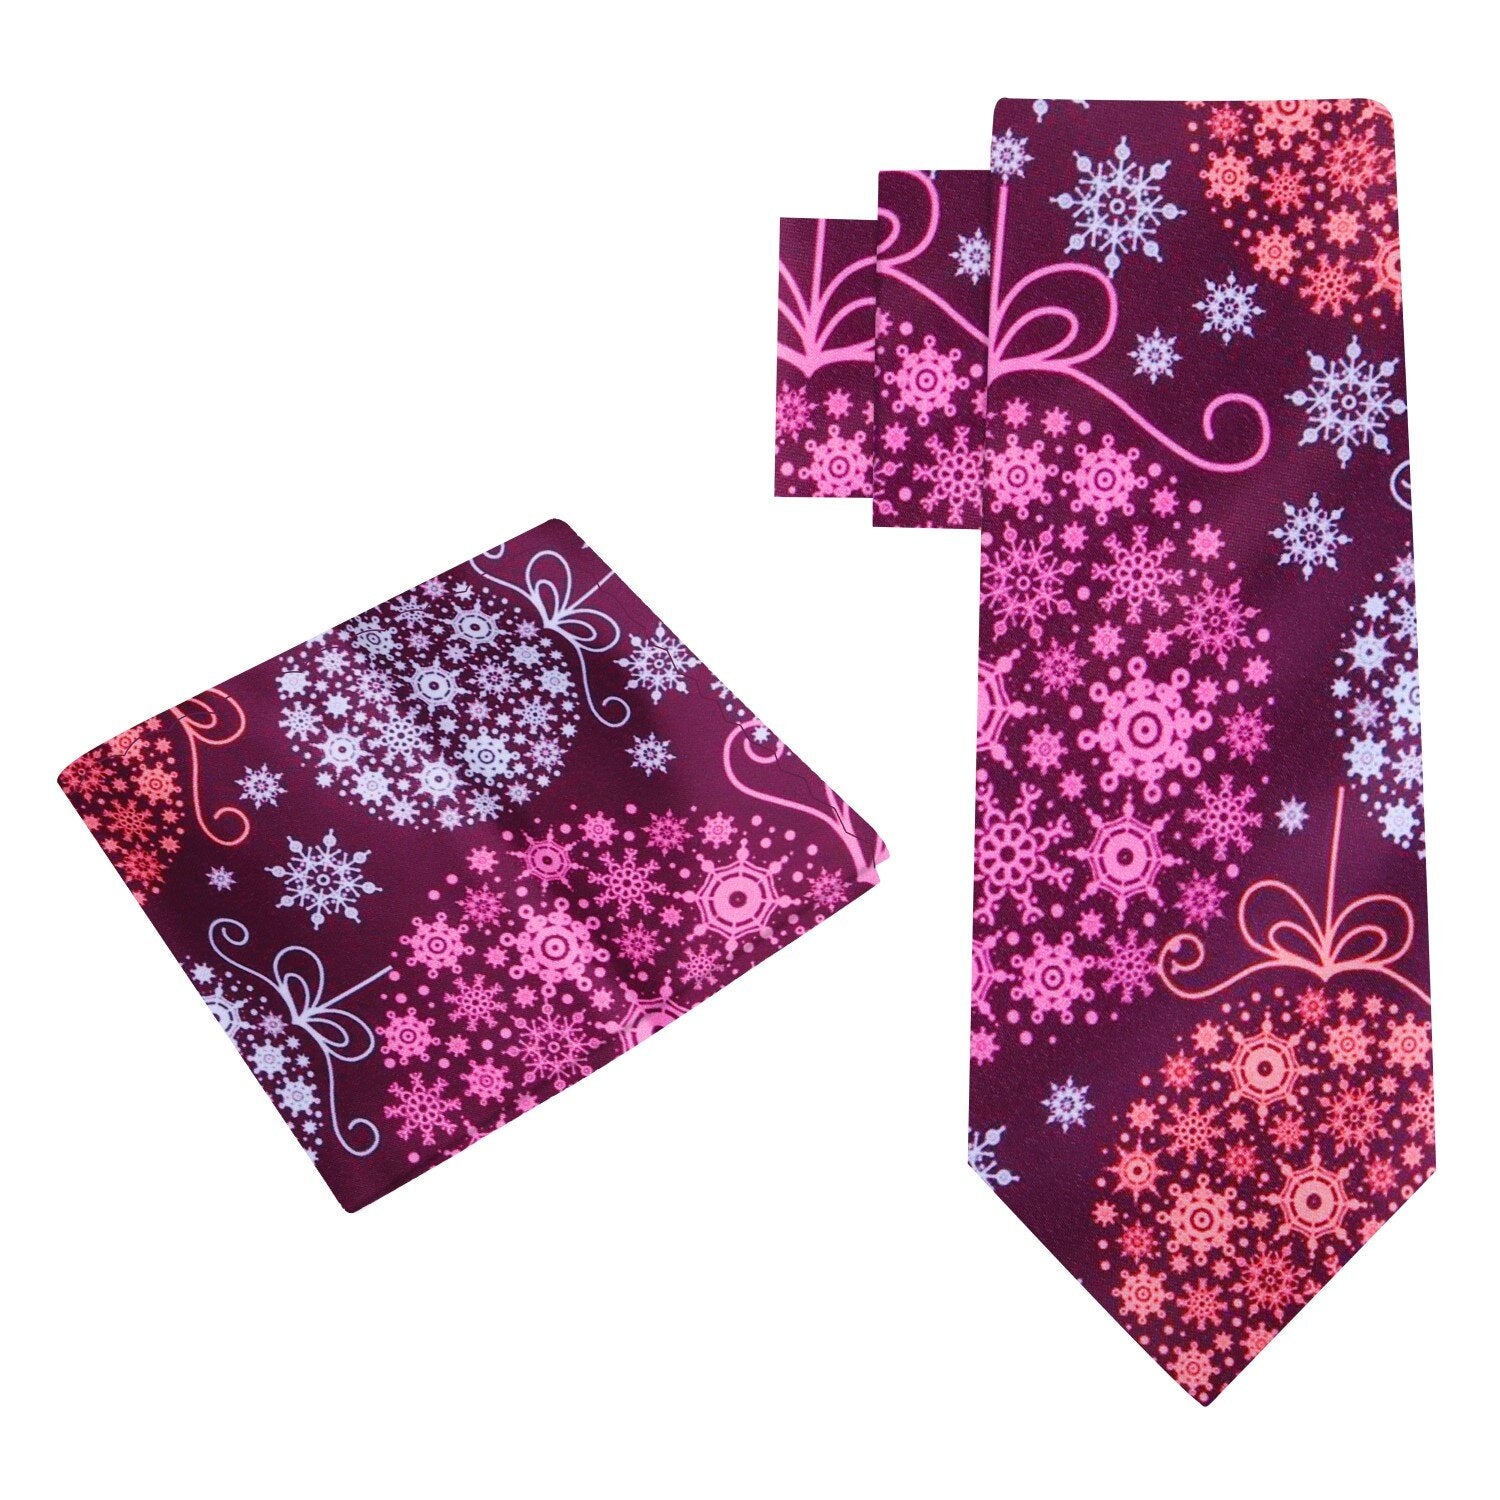 Alt View: Plum, Pink, Red, White Christmas Ornaments Tie and Pocket Square